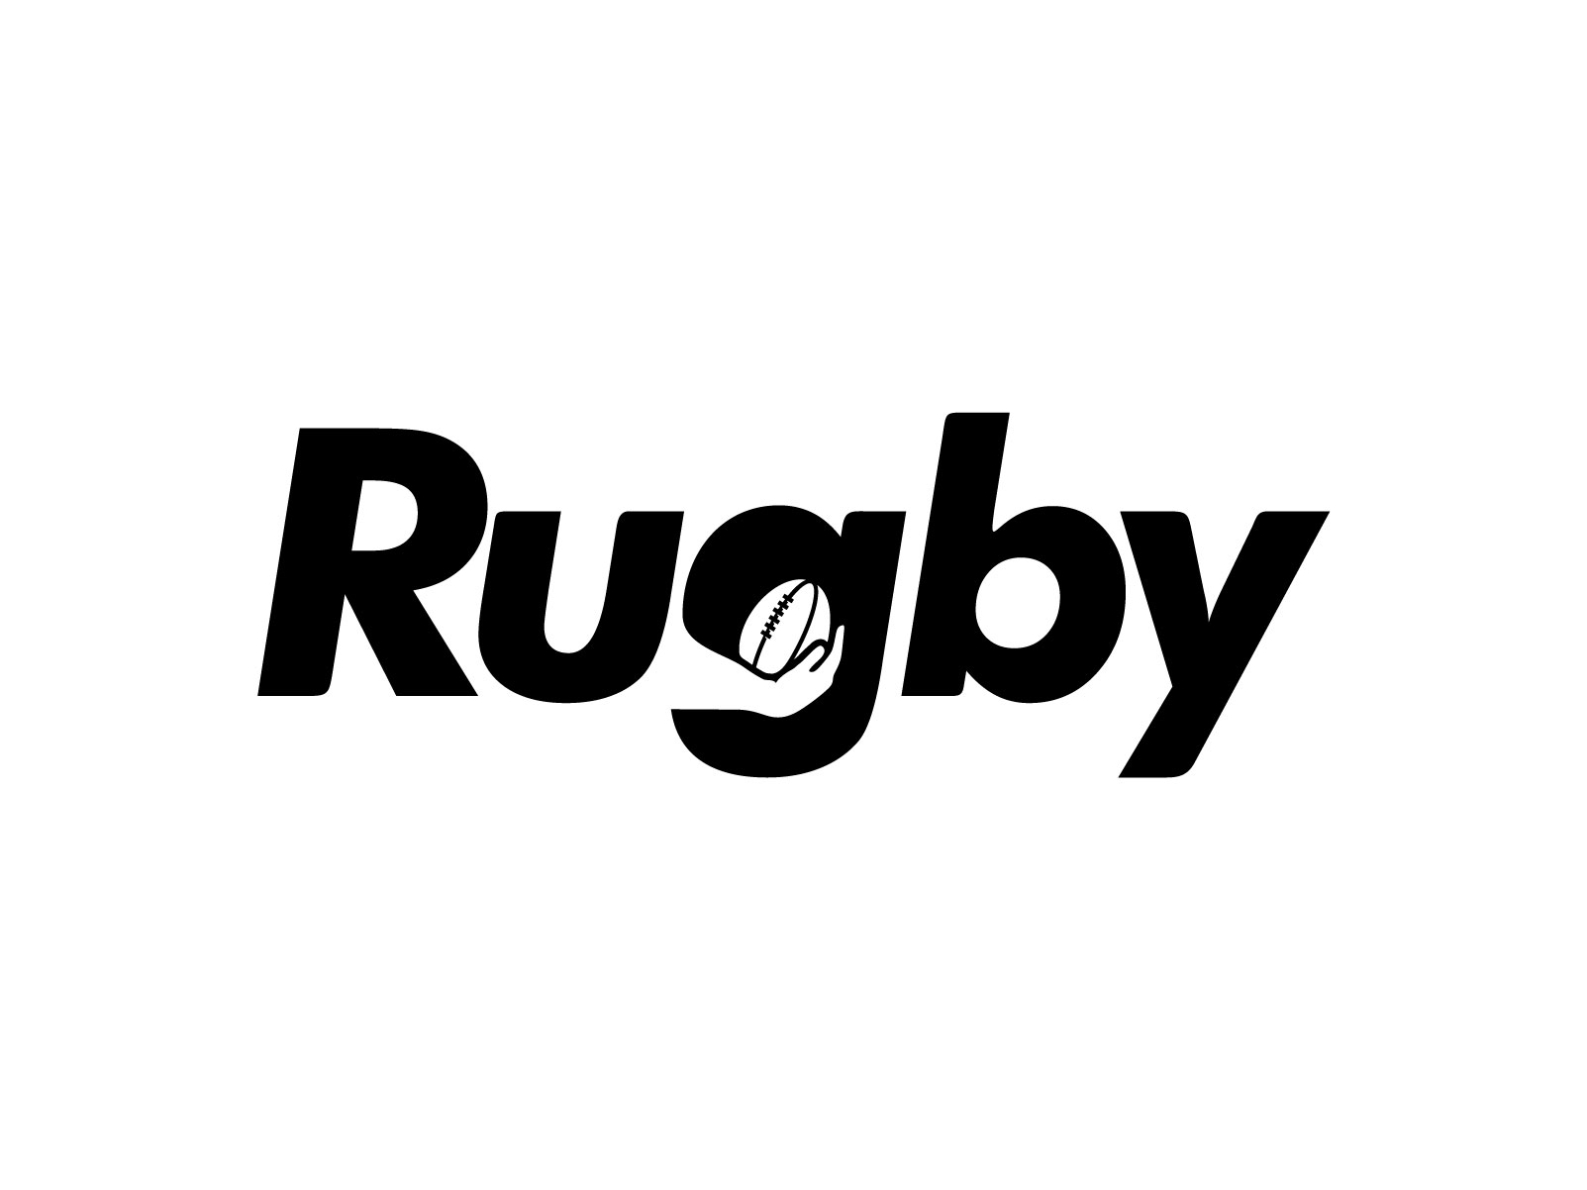 Rugby by Buqancreative on Dribbble